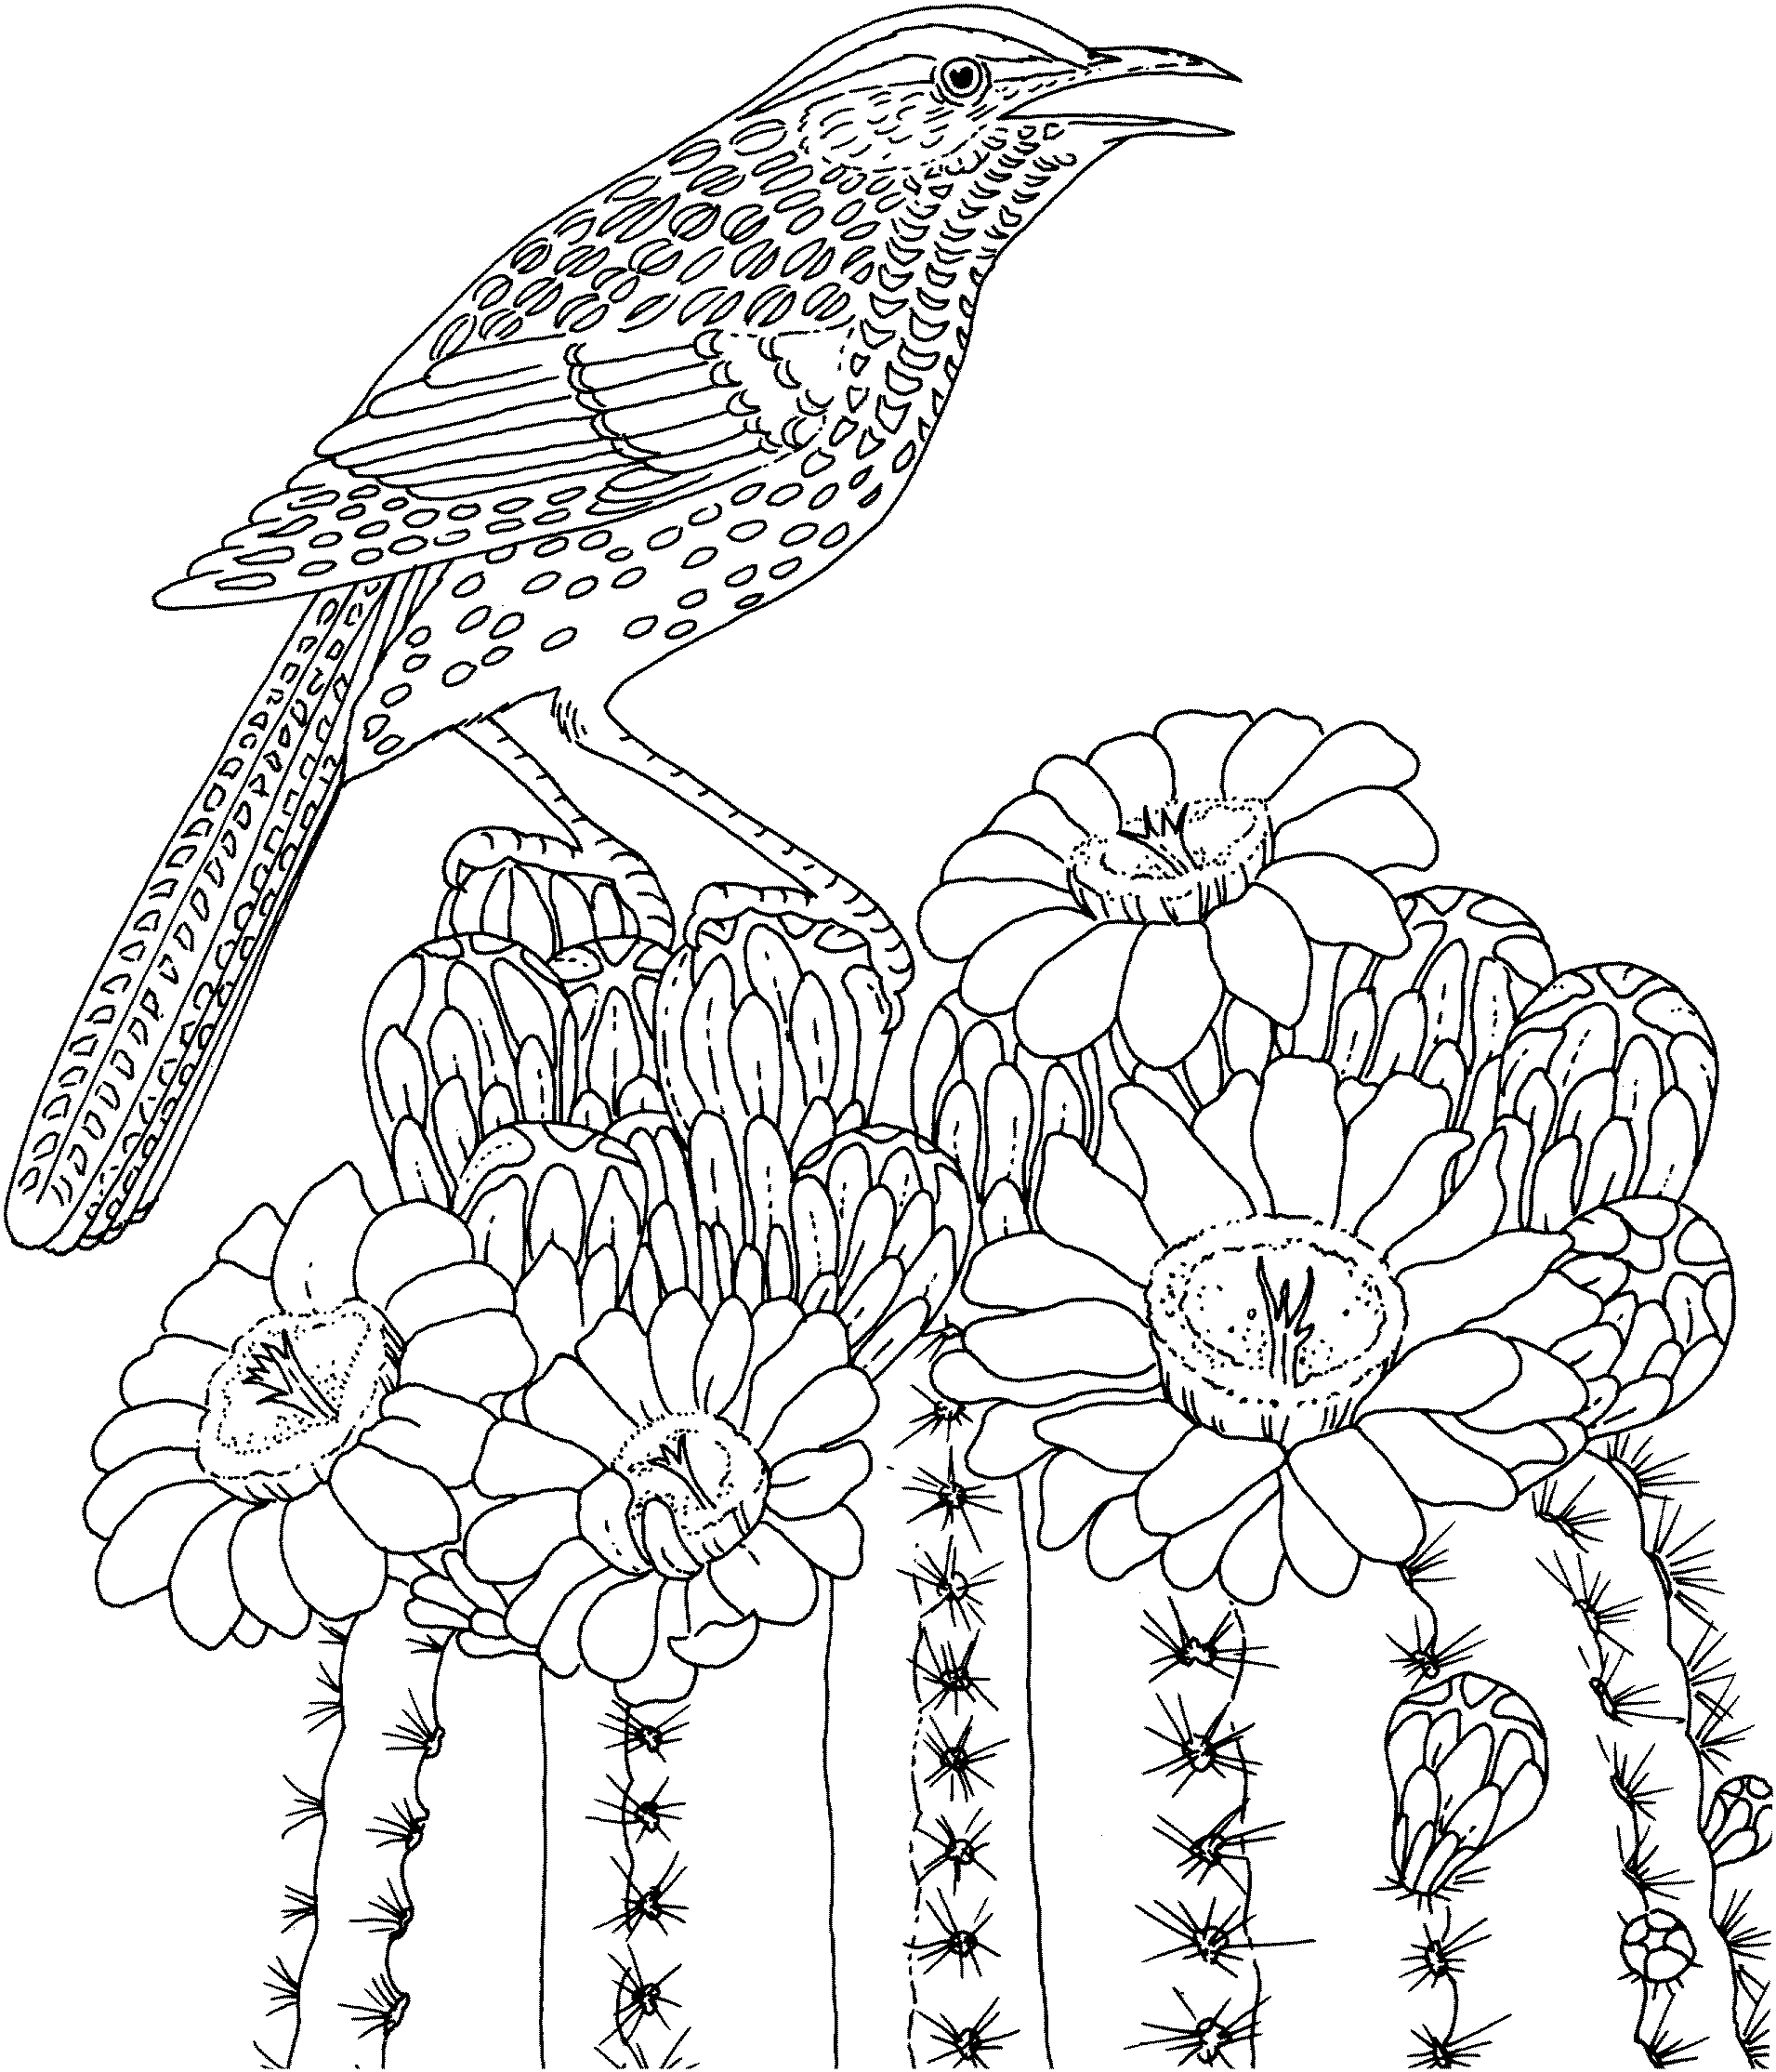 galleries-related-hard-coloring-pages-cool-printable-coloring-pages